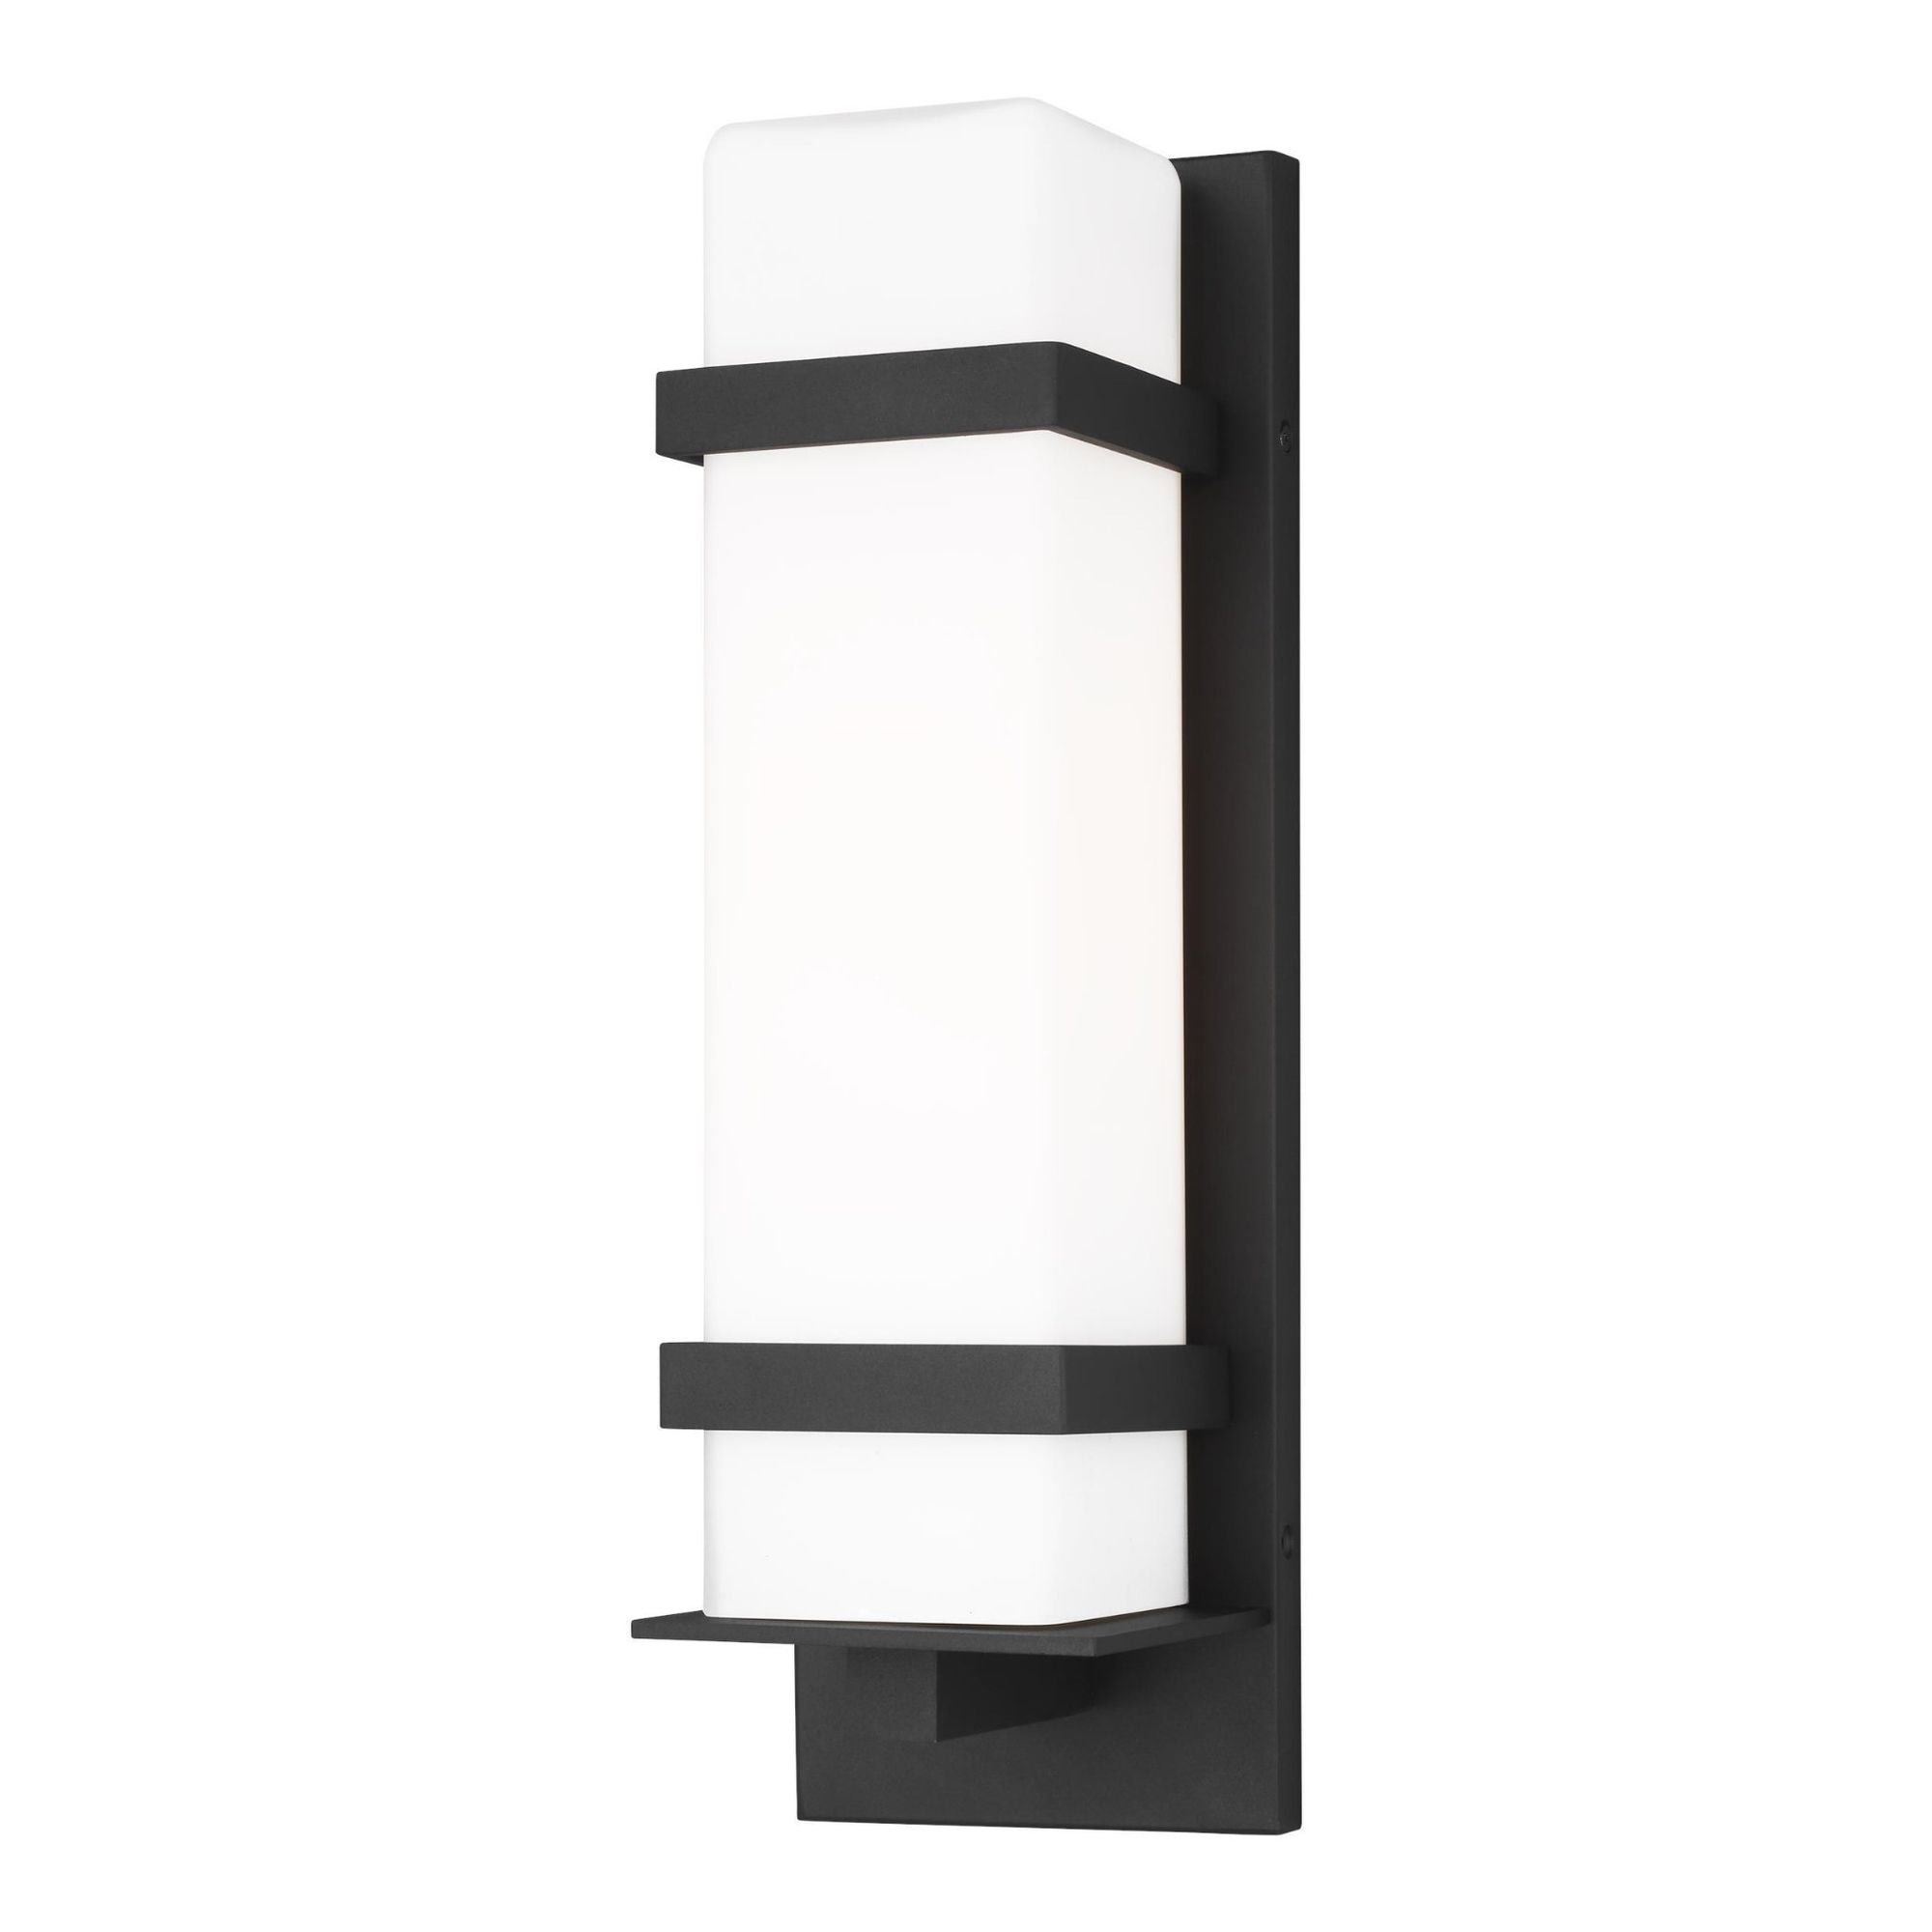 Alban Medium One Light Outdoor Wall Lantern LED Modern Fixture 6" Width 18" Height Aluminum Square Etched Opal Shade in Black